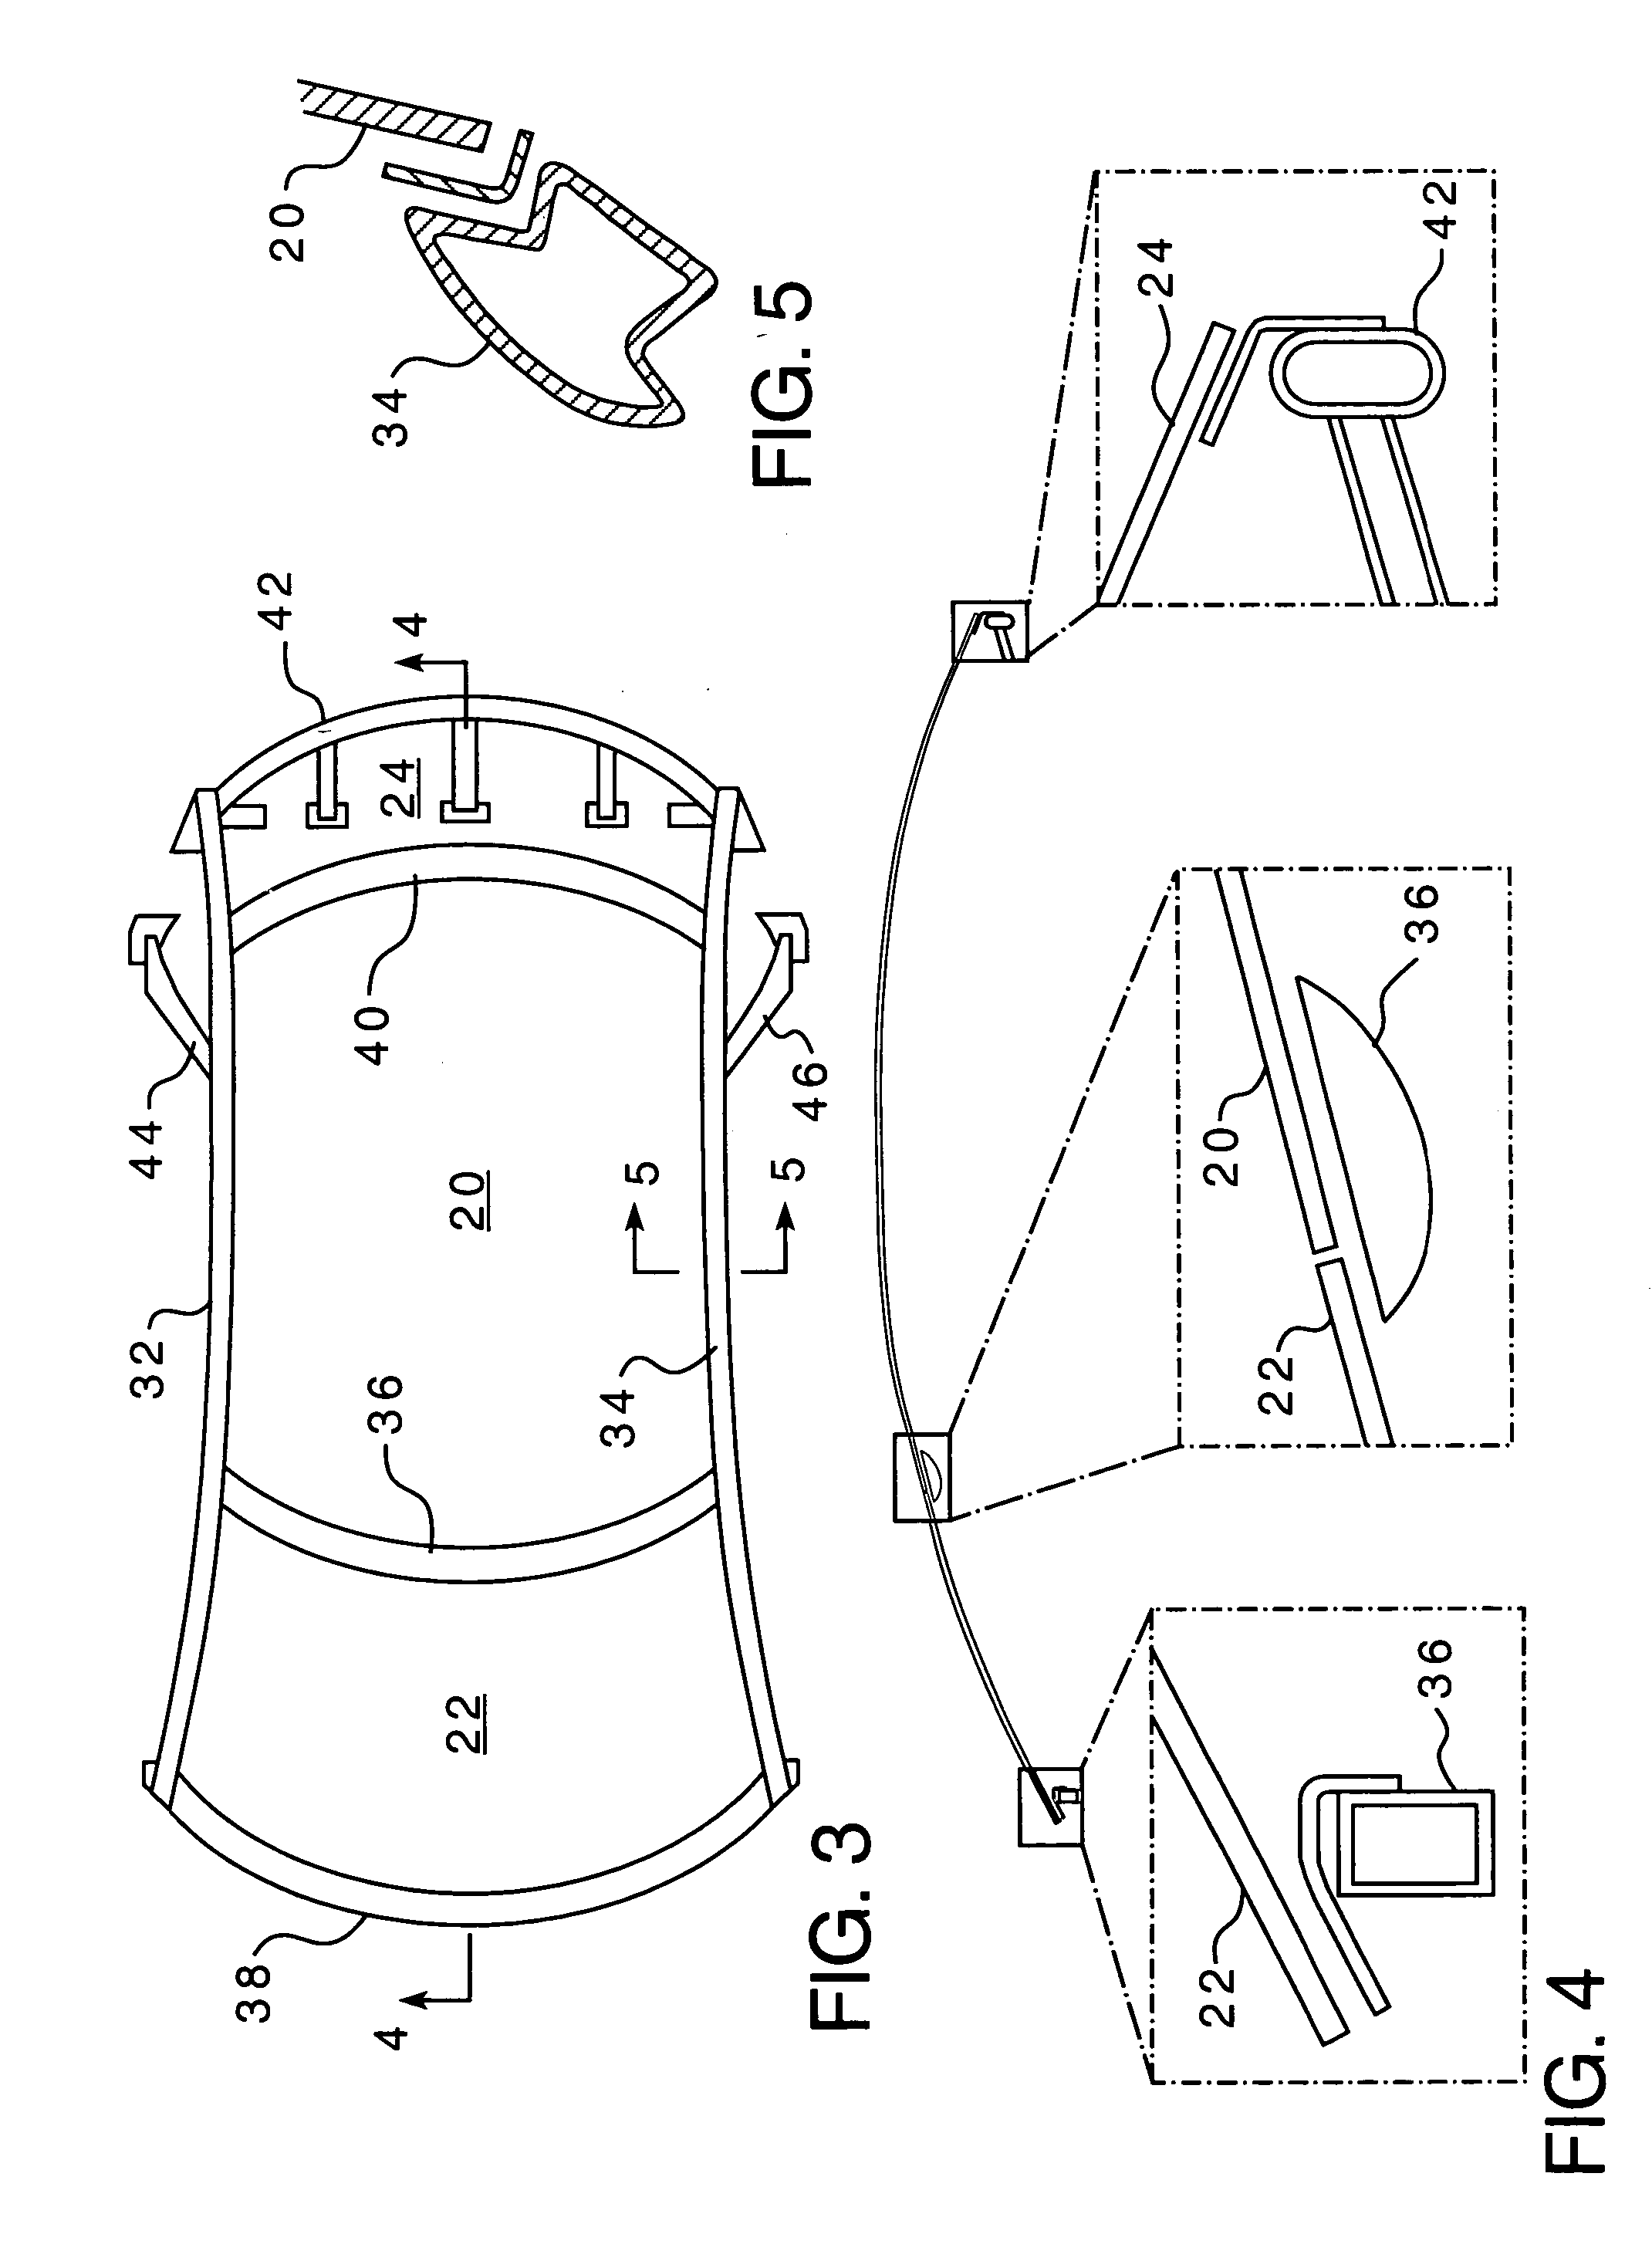 Antenna elements incorporated into the exterior structure of vehicle bodies